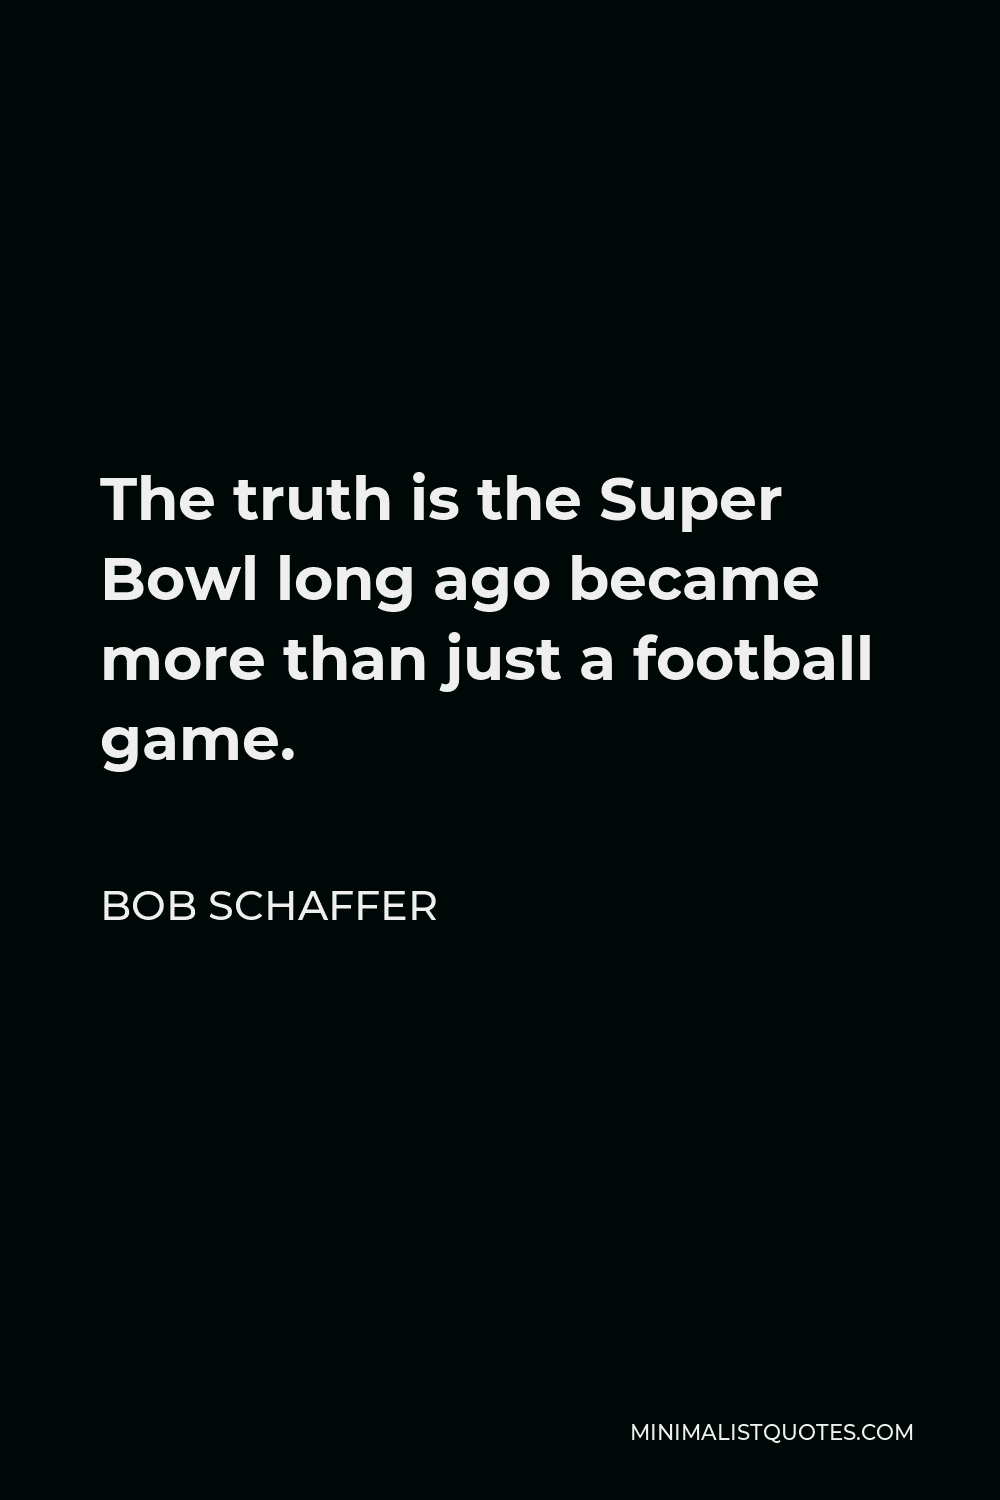 Bob Schaffer Quote - The truth is the Super Bowl long ago became more than just a football game.